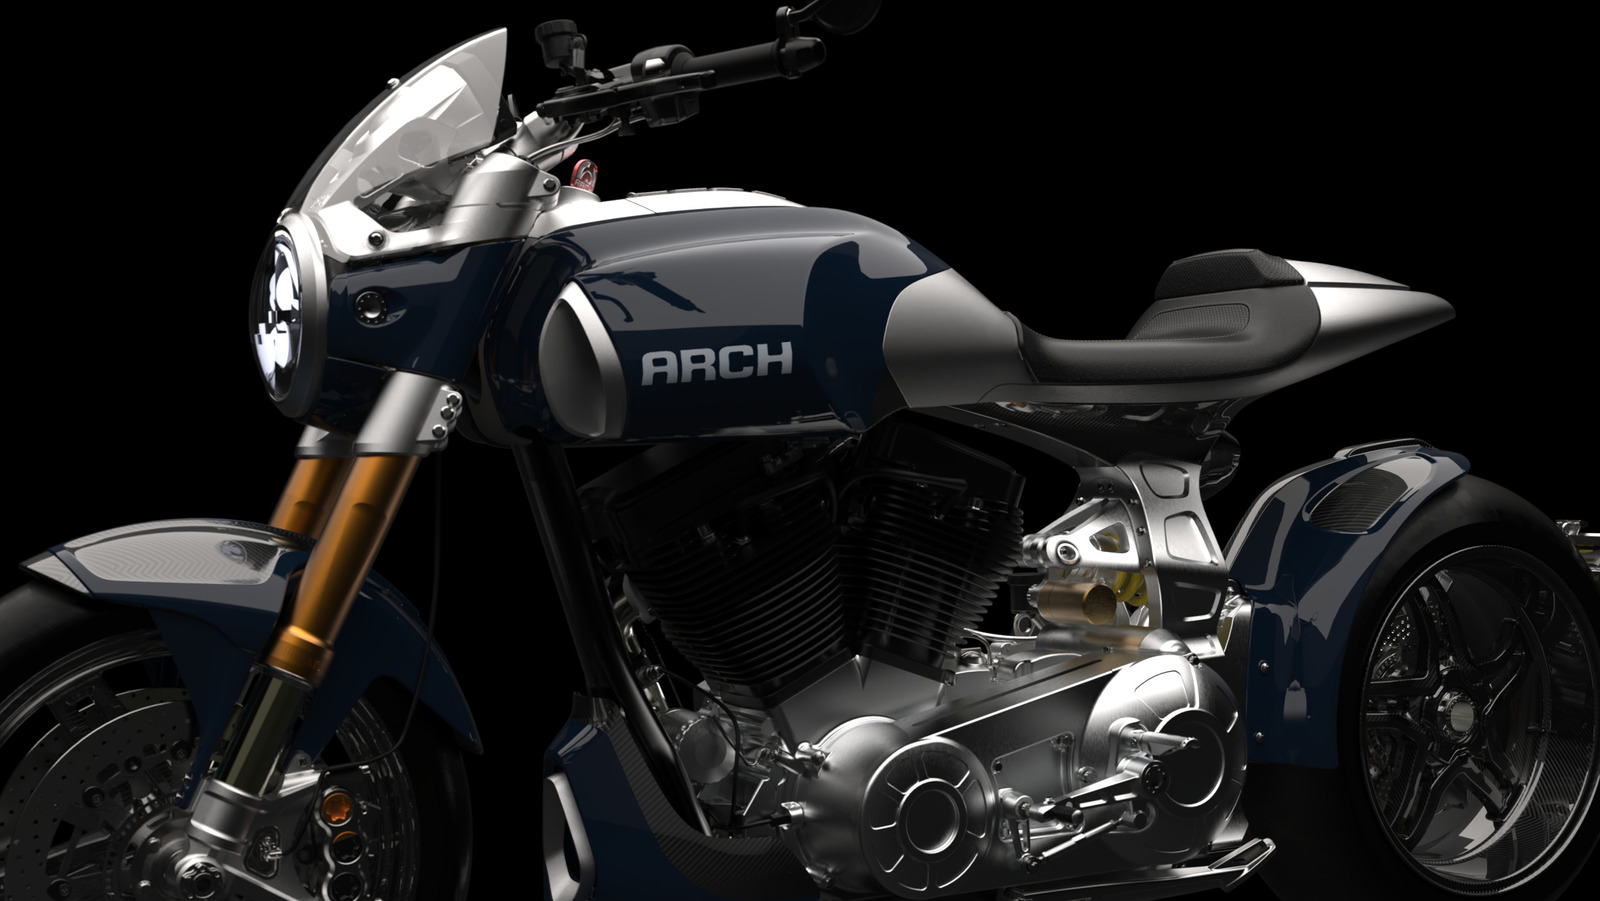 Keanu Reeves’ Newest Arch 1s Motorcycle Is A Sporty, Race Inspired Cruiser